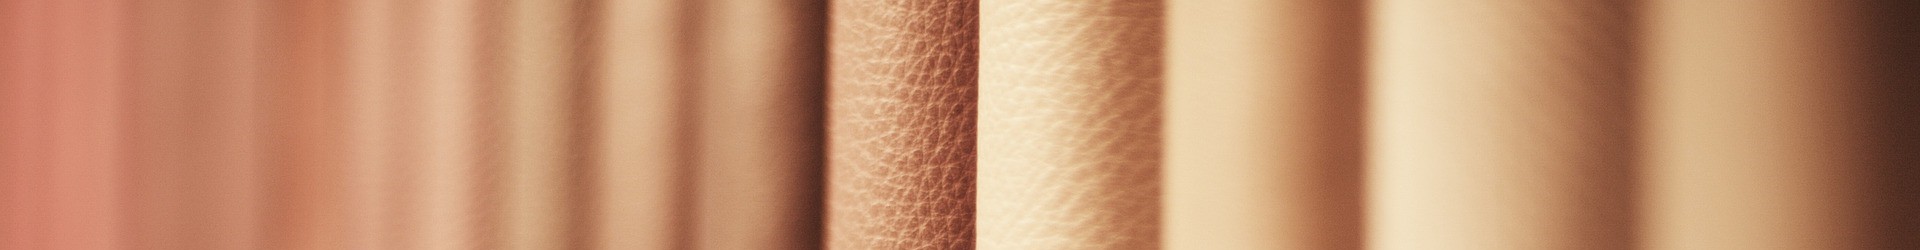 Lychee Pearl Effect PU Leather for sofa upholstery Jewelry Box Package